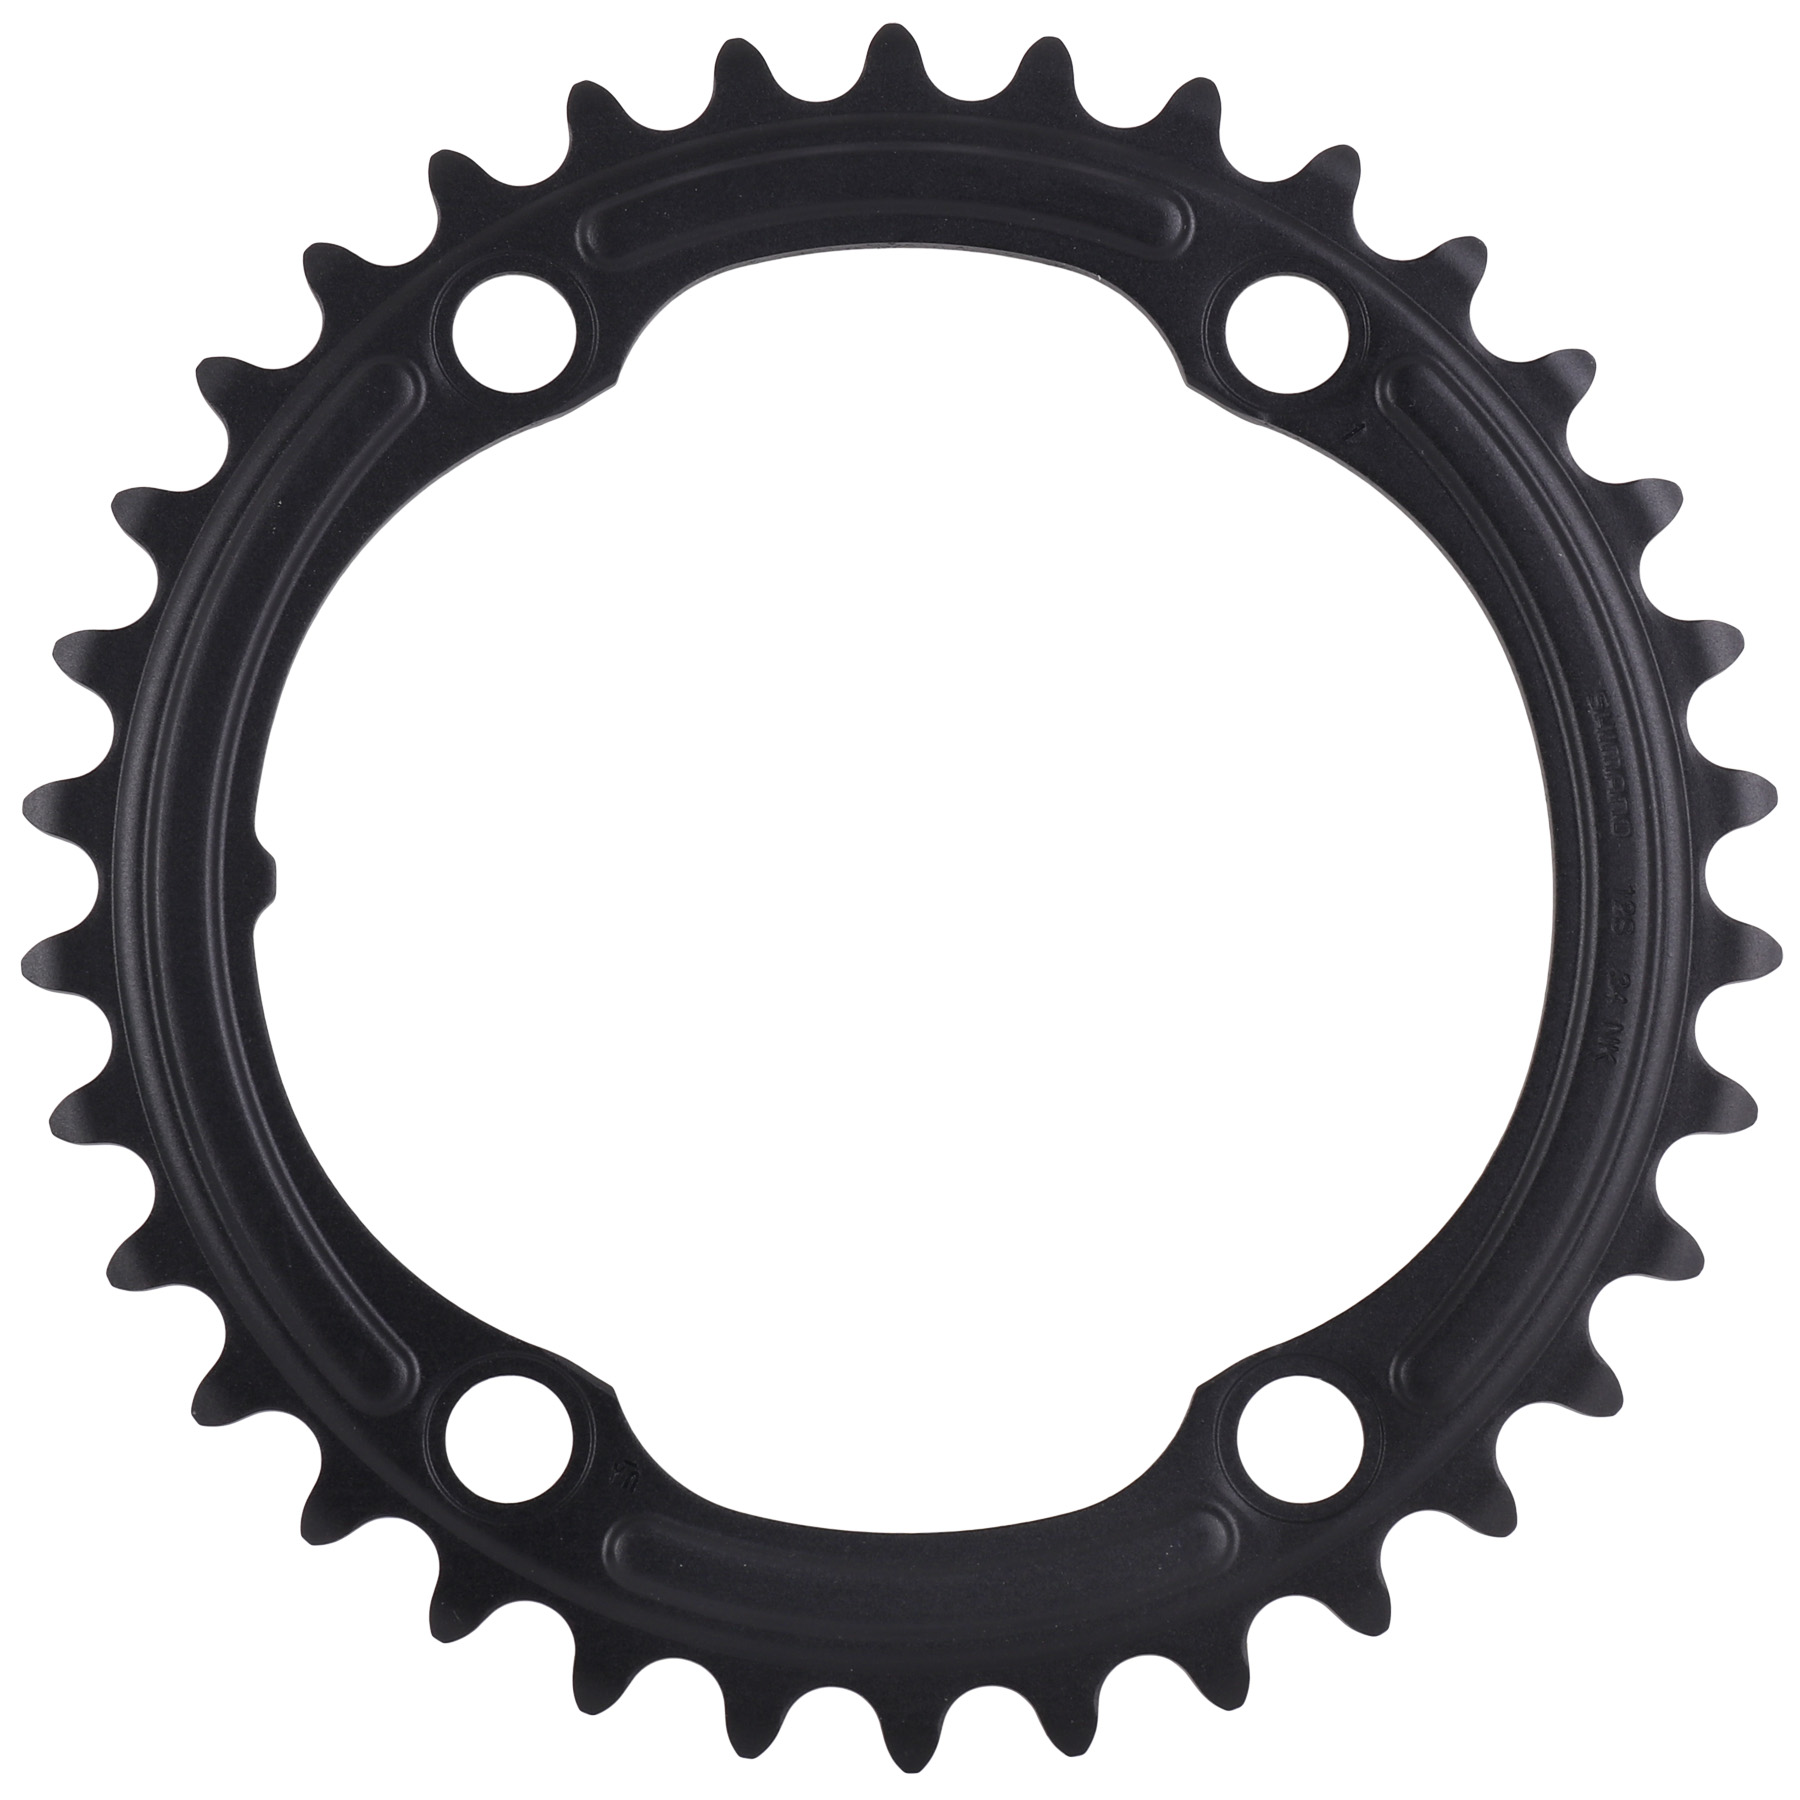 Picture of Shimano Chainring for 105 FC-R7100 Crankset - inner